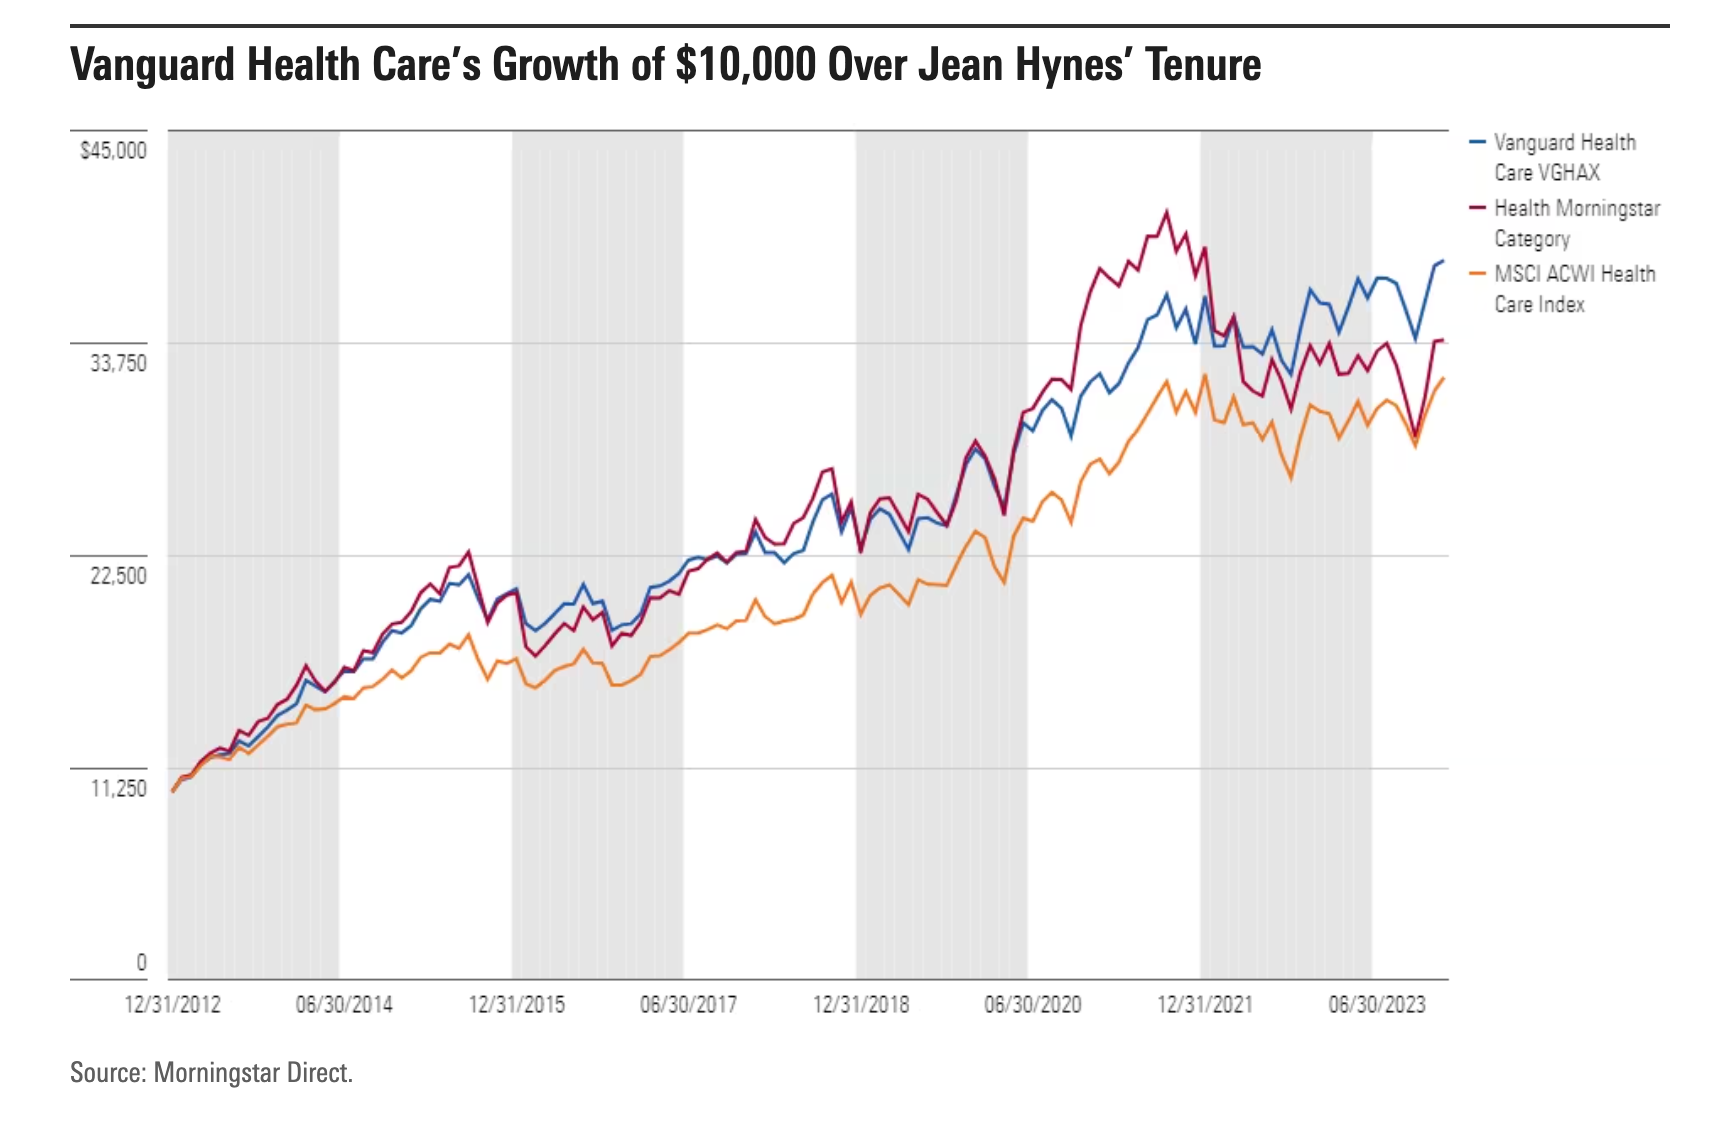 Line graph showing Vanguard Health Care VGHAX growth from December 2012 through June 2023 compared to Health Morningstar Category and MSCI ACWI Health Care Index.